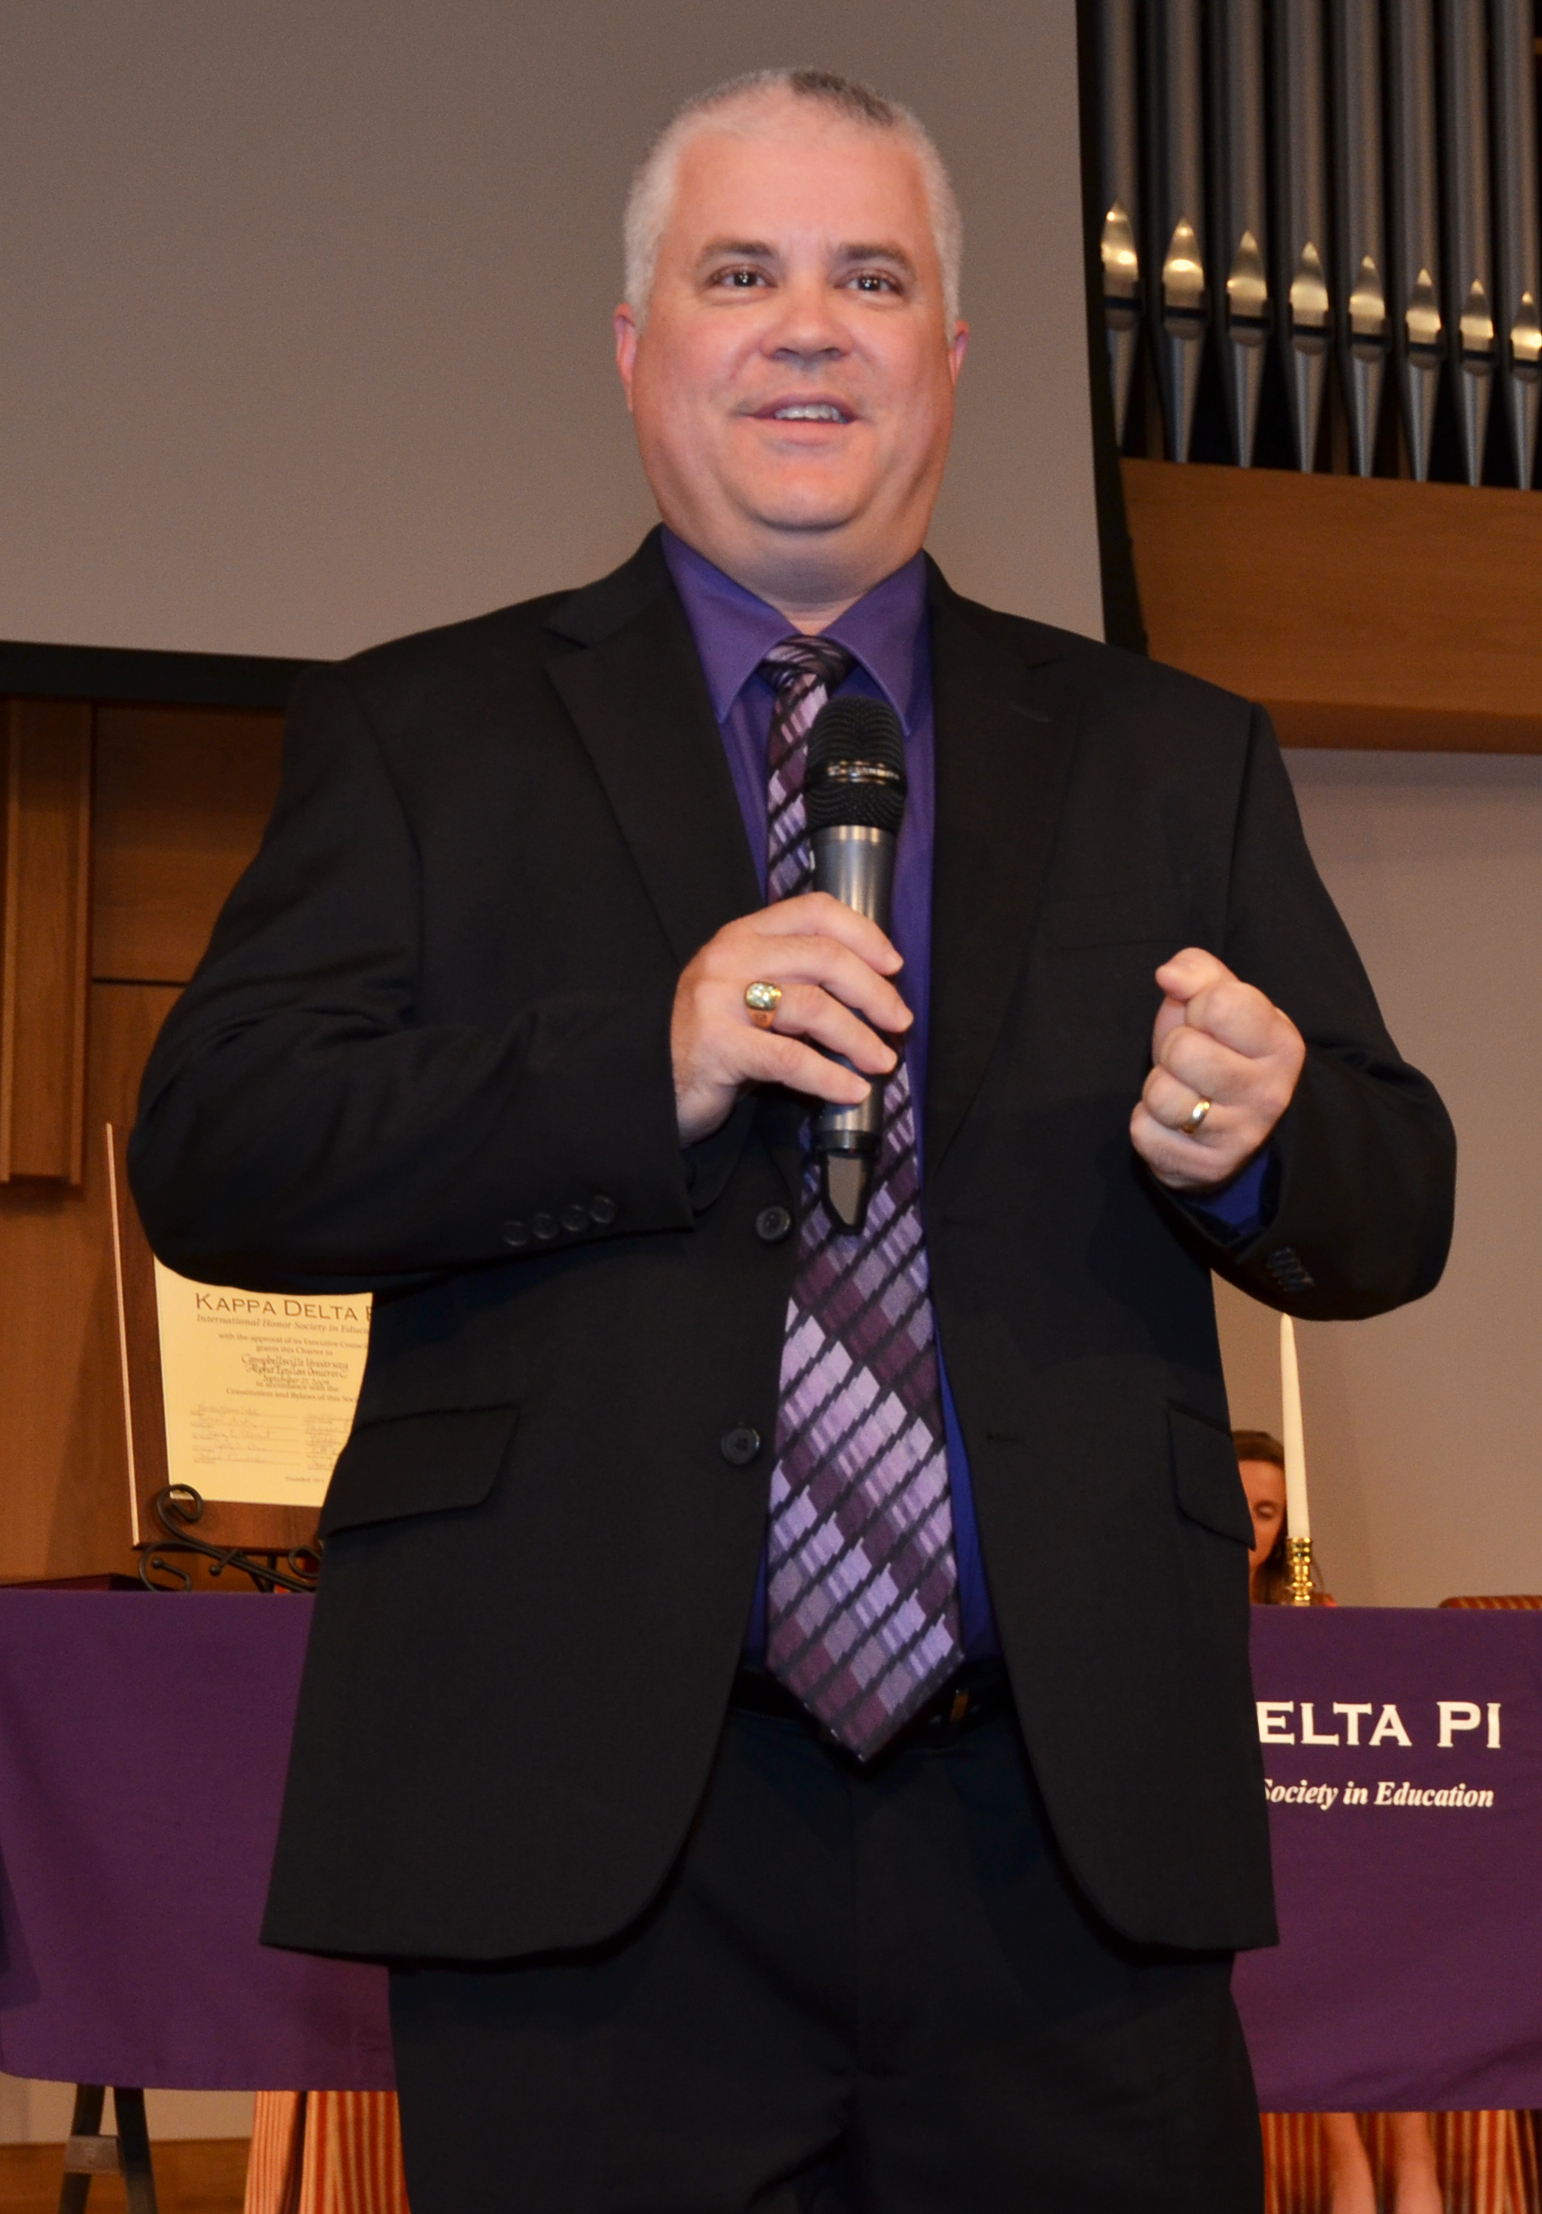 Dr. Charles Hamilton was the guest speaker at the Kappa  Delta Pi Initiation where he spoke about influence. (CU Photo by Drew Tucker)